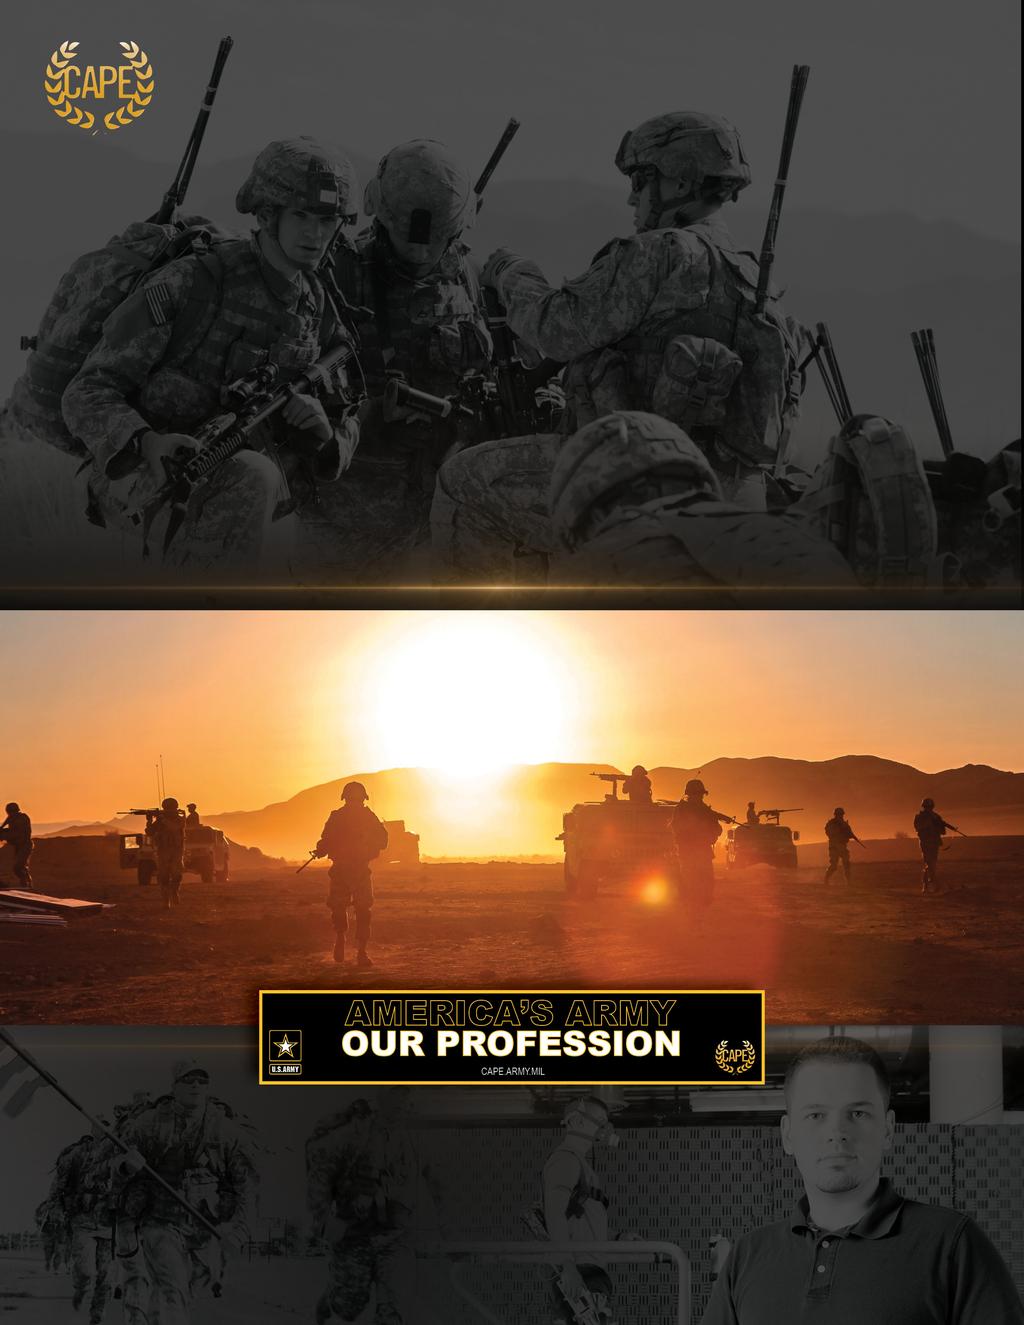 The Center for Army Profession and Ethic Video